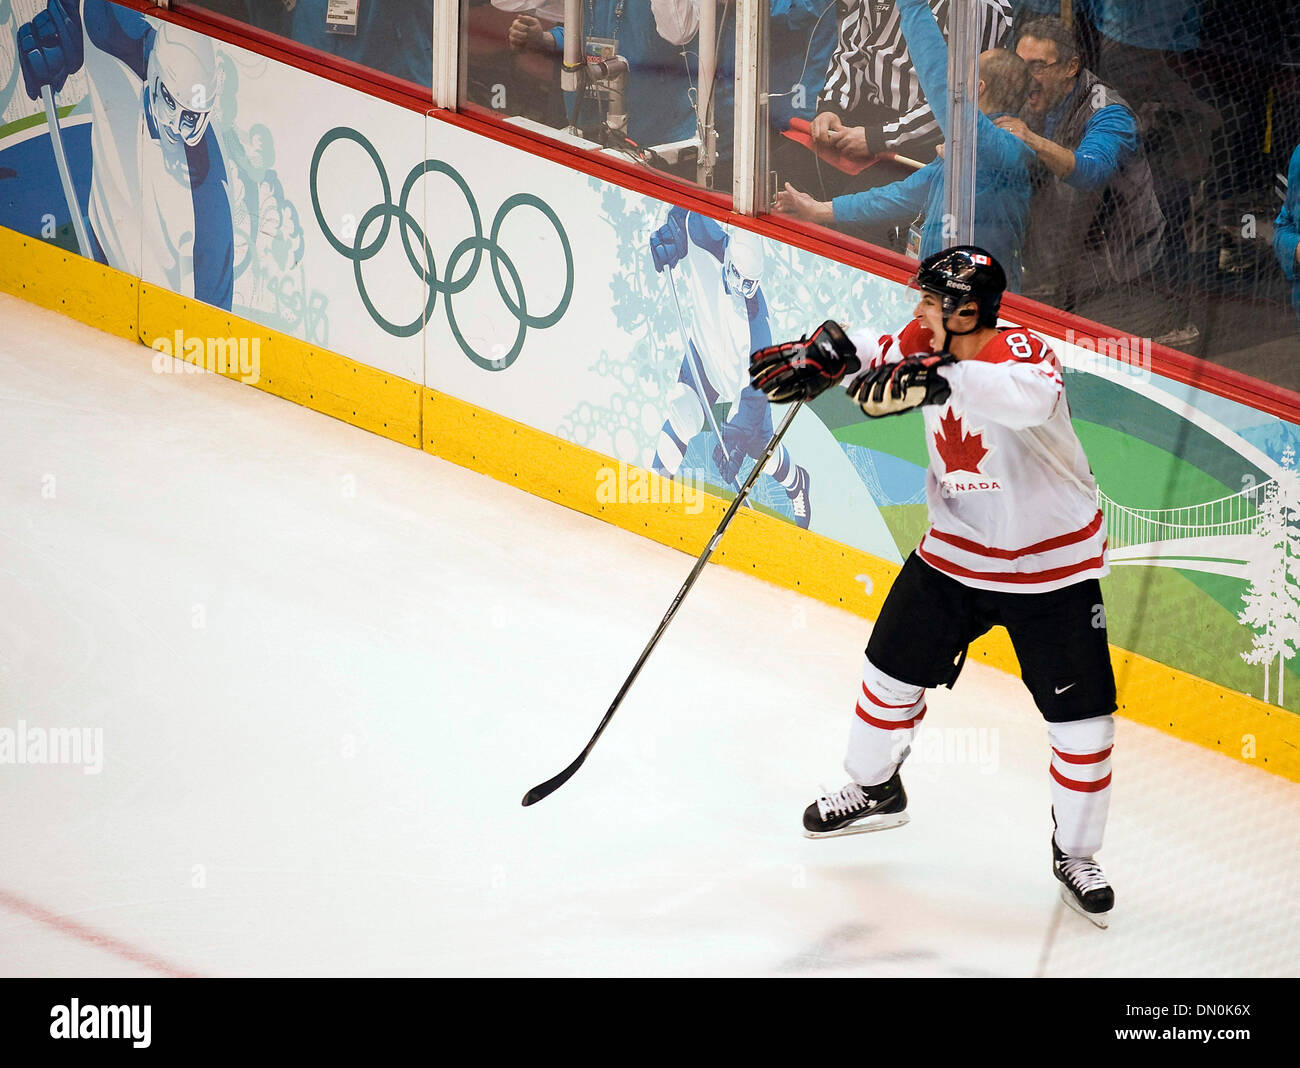 Feb. 28, 2010 - Vancouver, British Columbia, Canada - Canada's SIDNEY CROSBY  celebrates his game winning goal over USA's RYAN MILLER in overtime to give  Canada the gold medal in Men's Gold